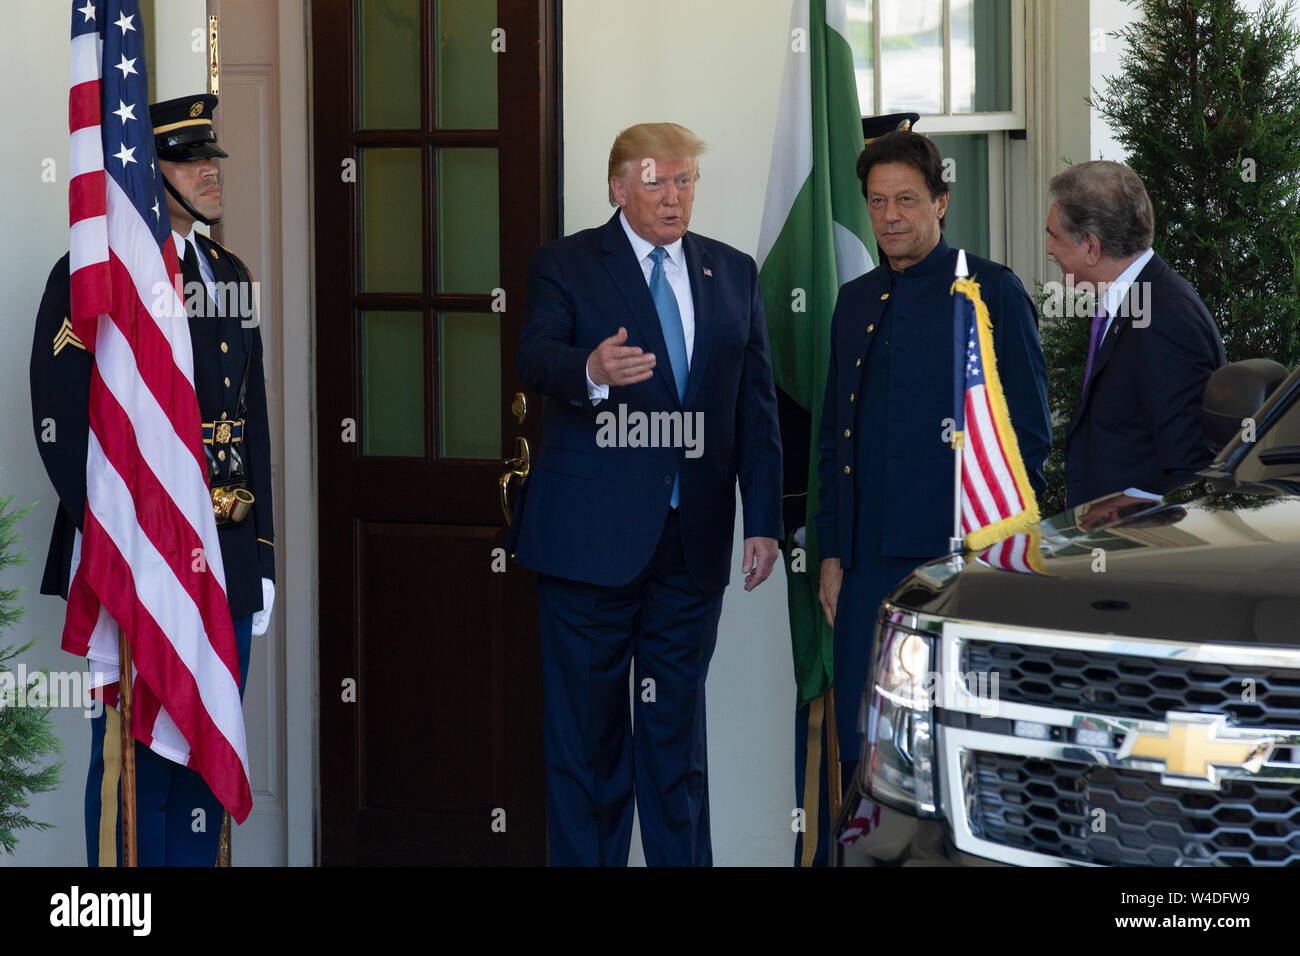 United States President Donald J. Trump greets the Prime Minister of the Islamic Republic of Pakistan Imran Khan as he arrives to the White House in Washington, DC, U.S. on July 22, 2019. Credit: Stefani Reynolds/CNP /MediaPunch Stock Photo